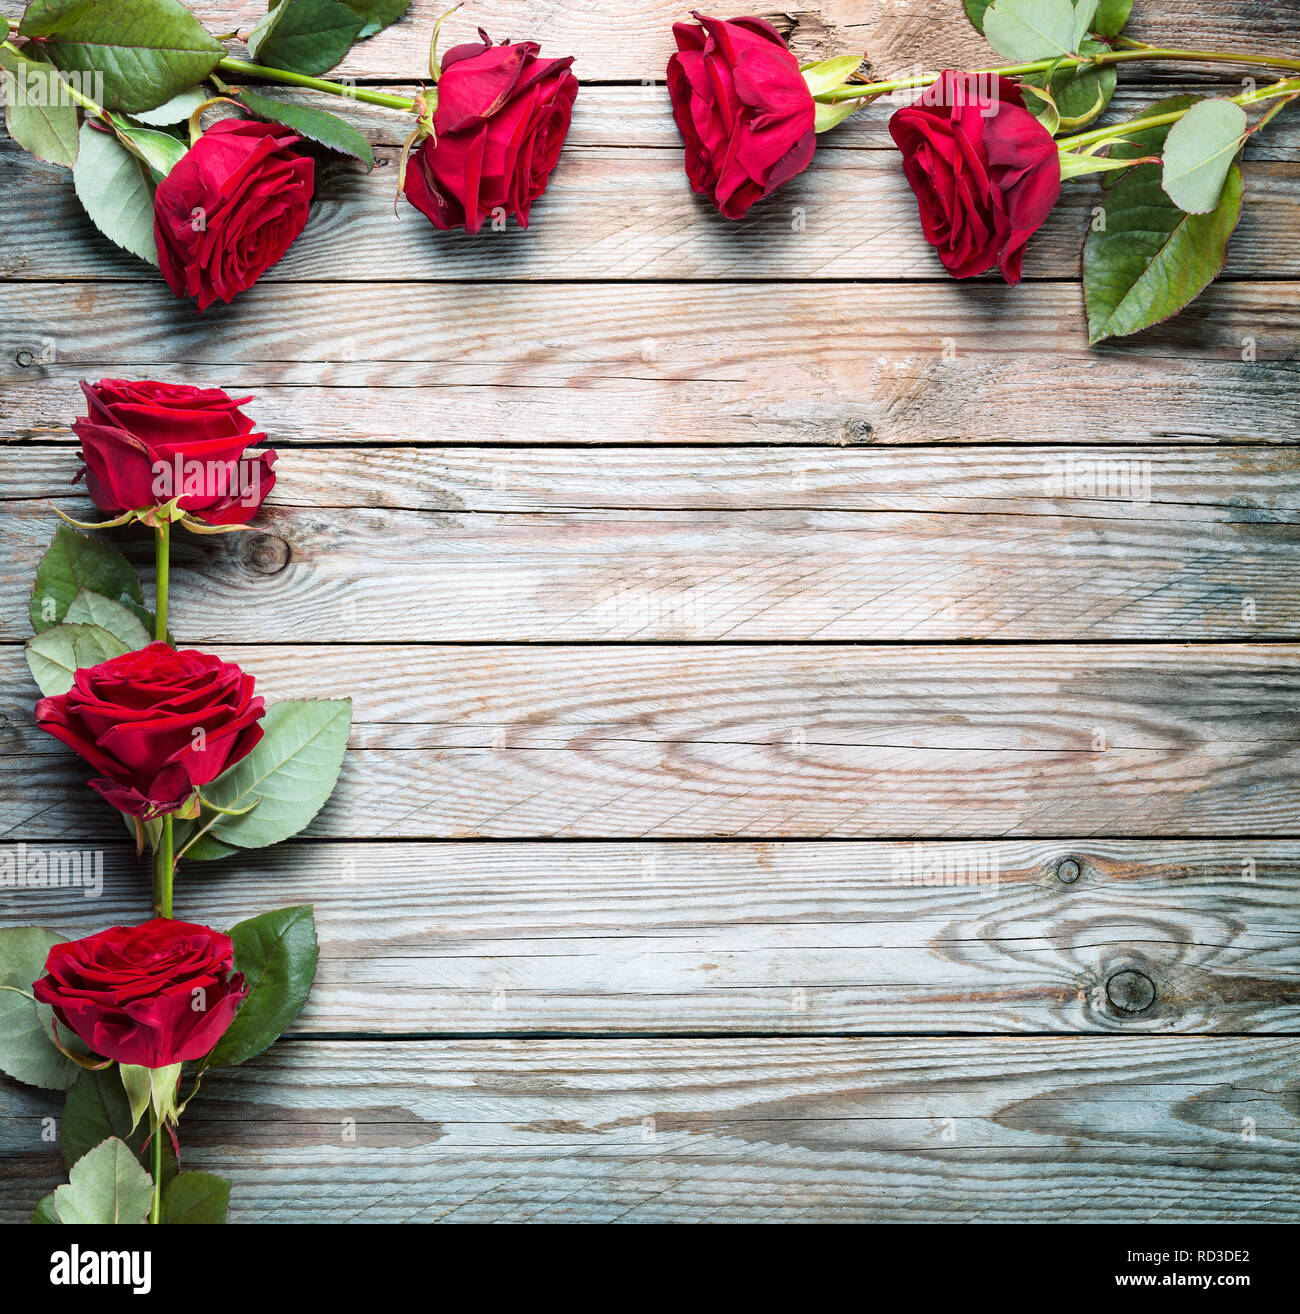 Bouquet of red roses on wooden rustic background. Stock Photo